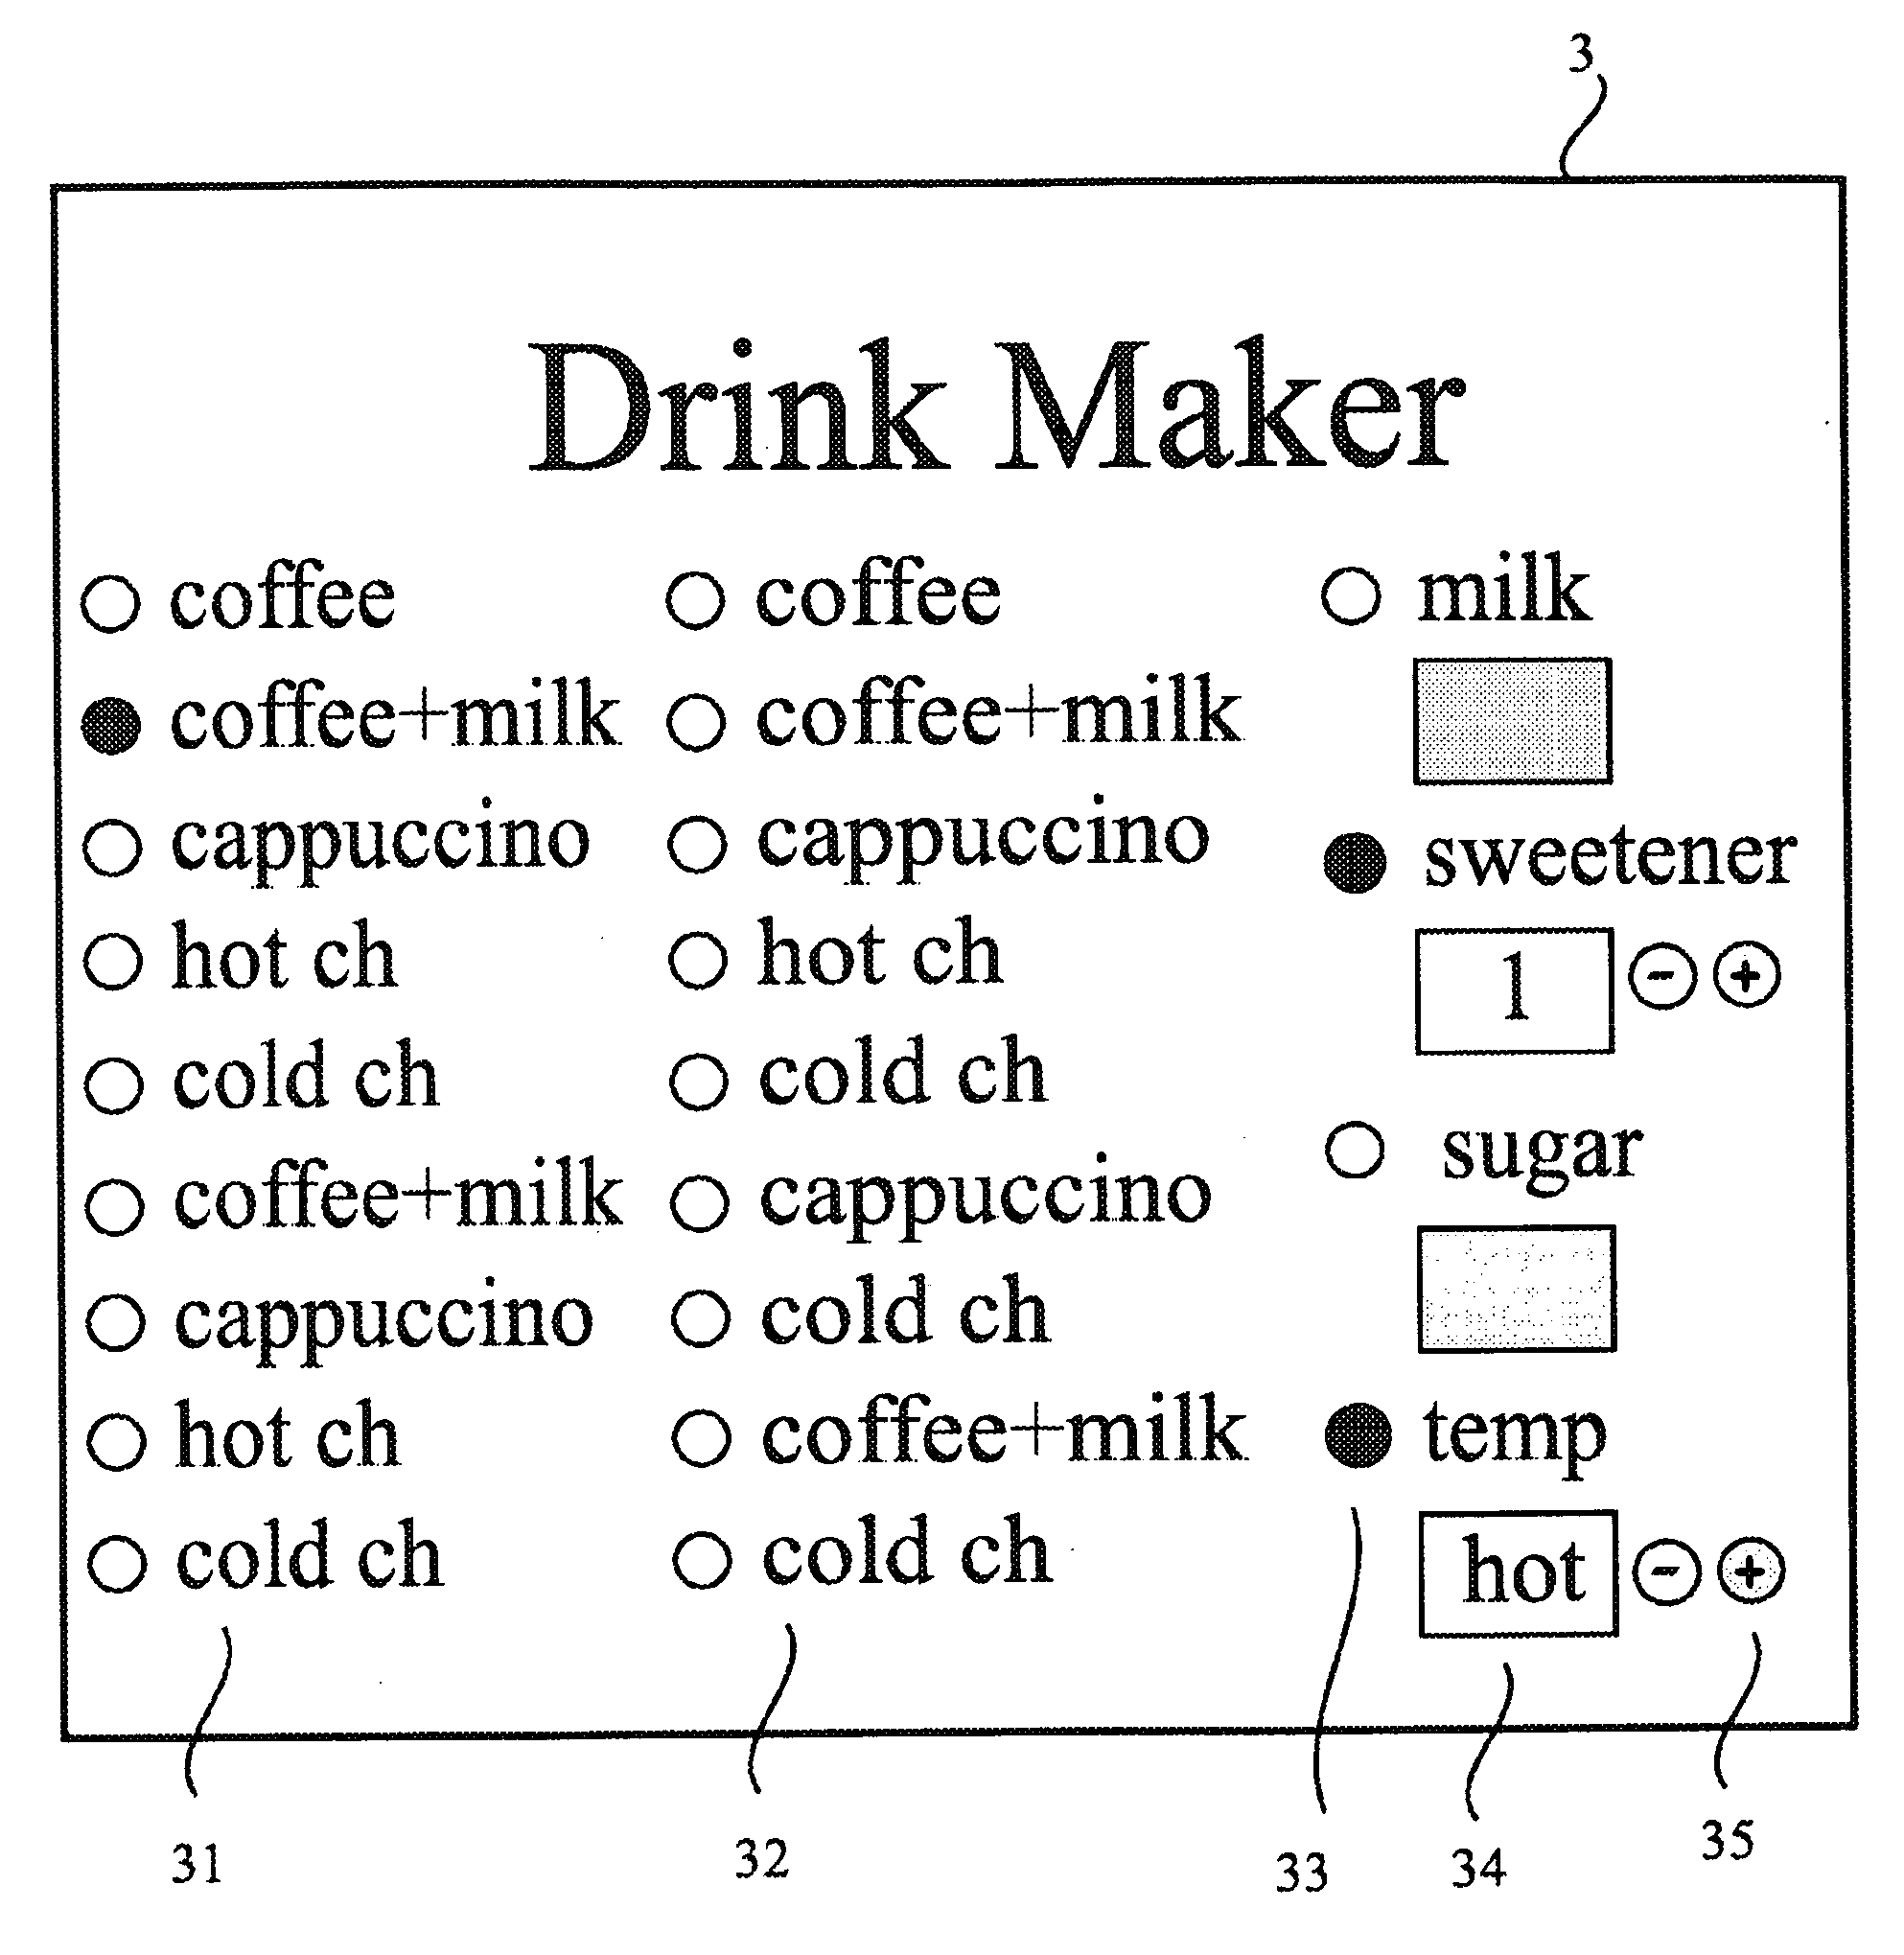 Drinks machine with network drink ordering